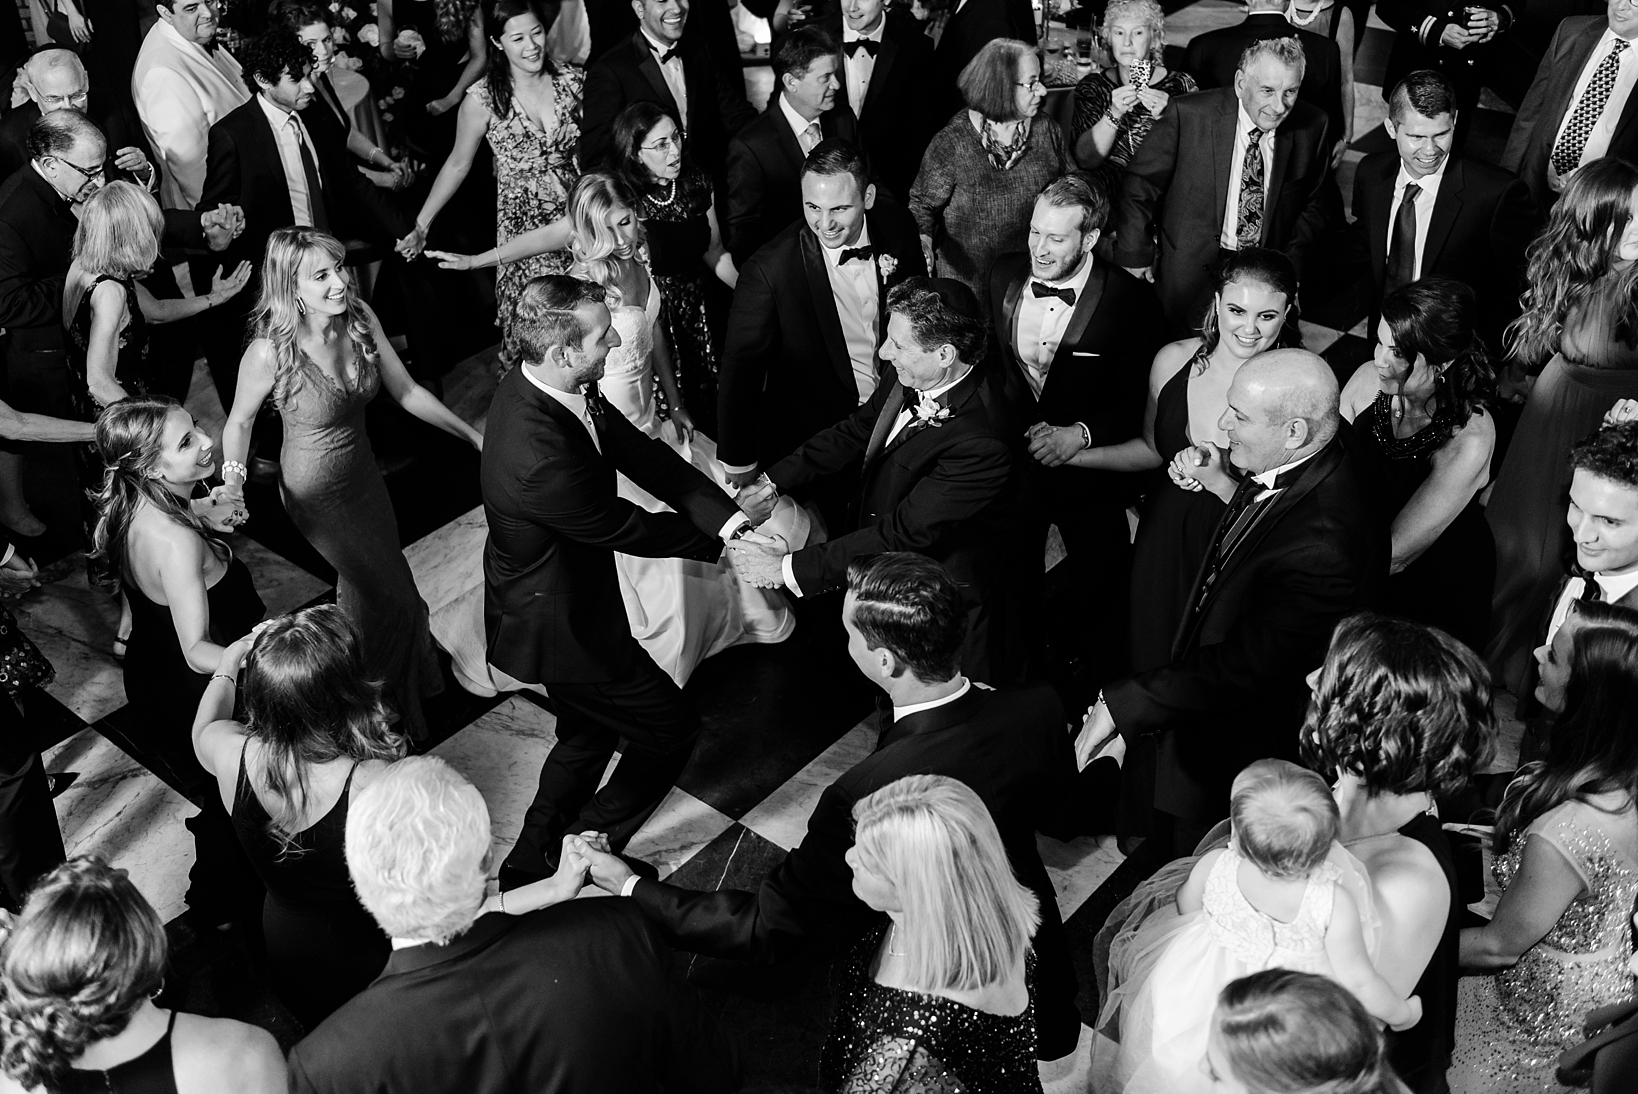 The Groom dances with his Father-in-Law at the center of a circle made by dancing guests during the wedding reception